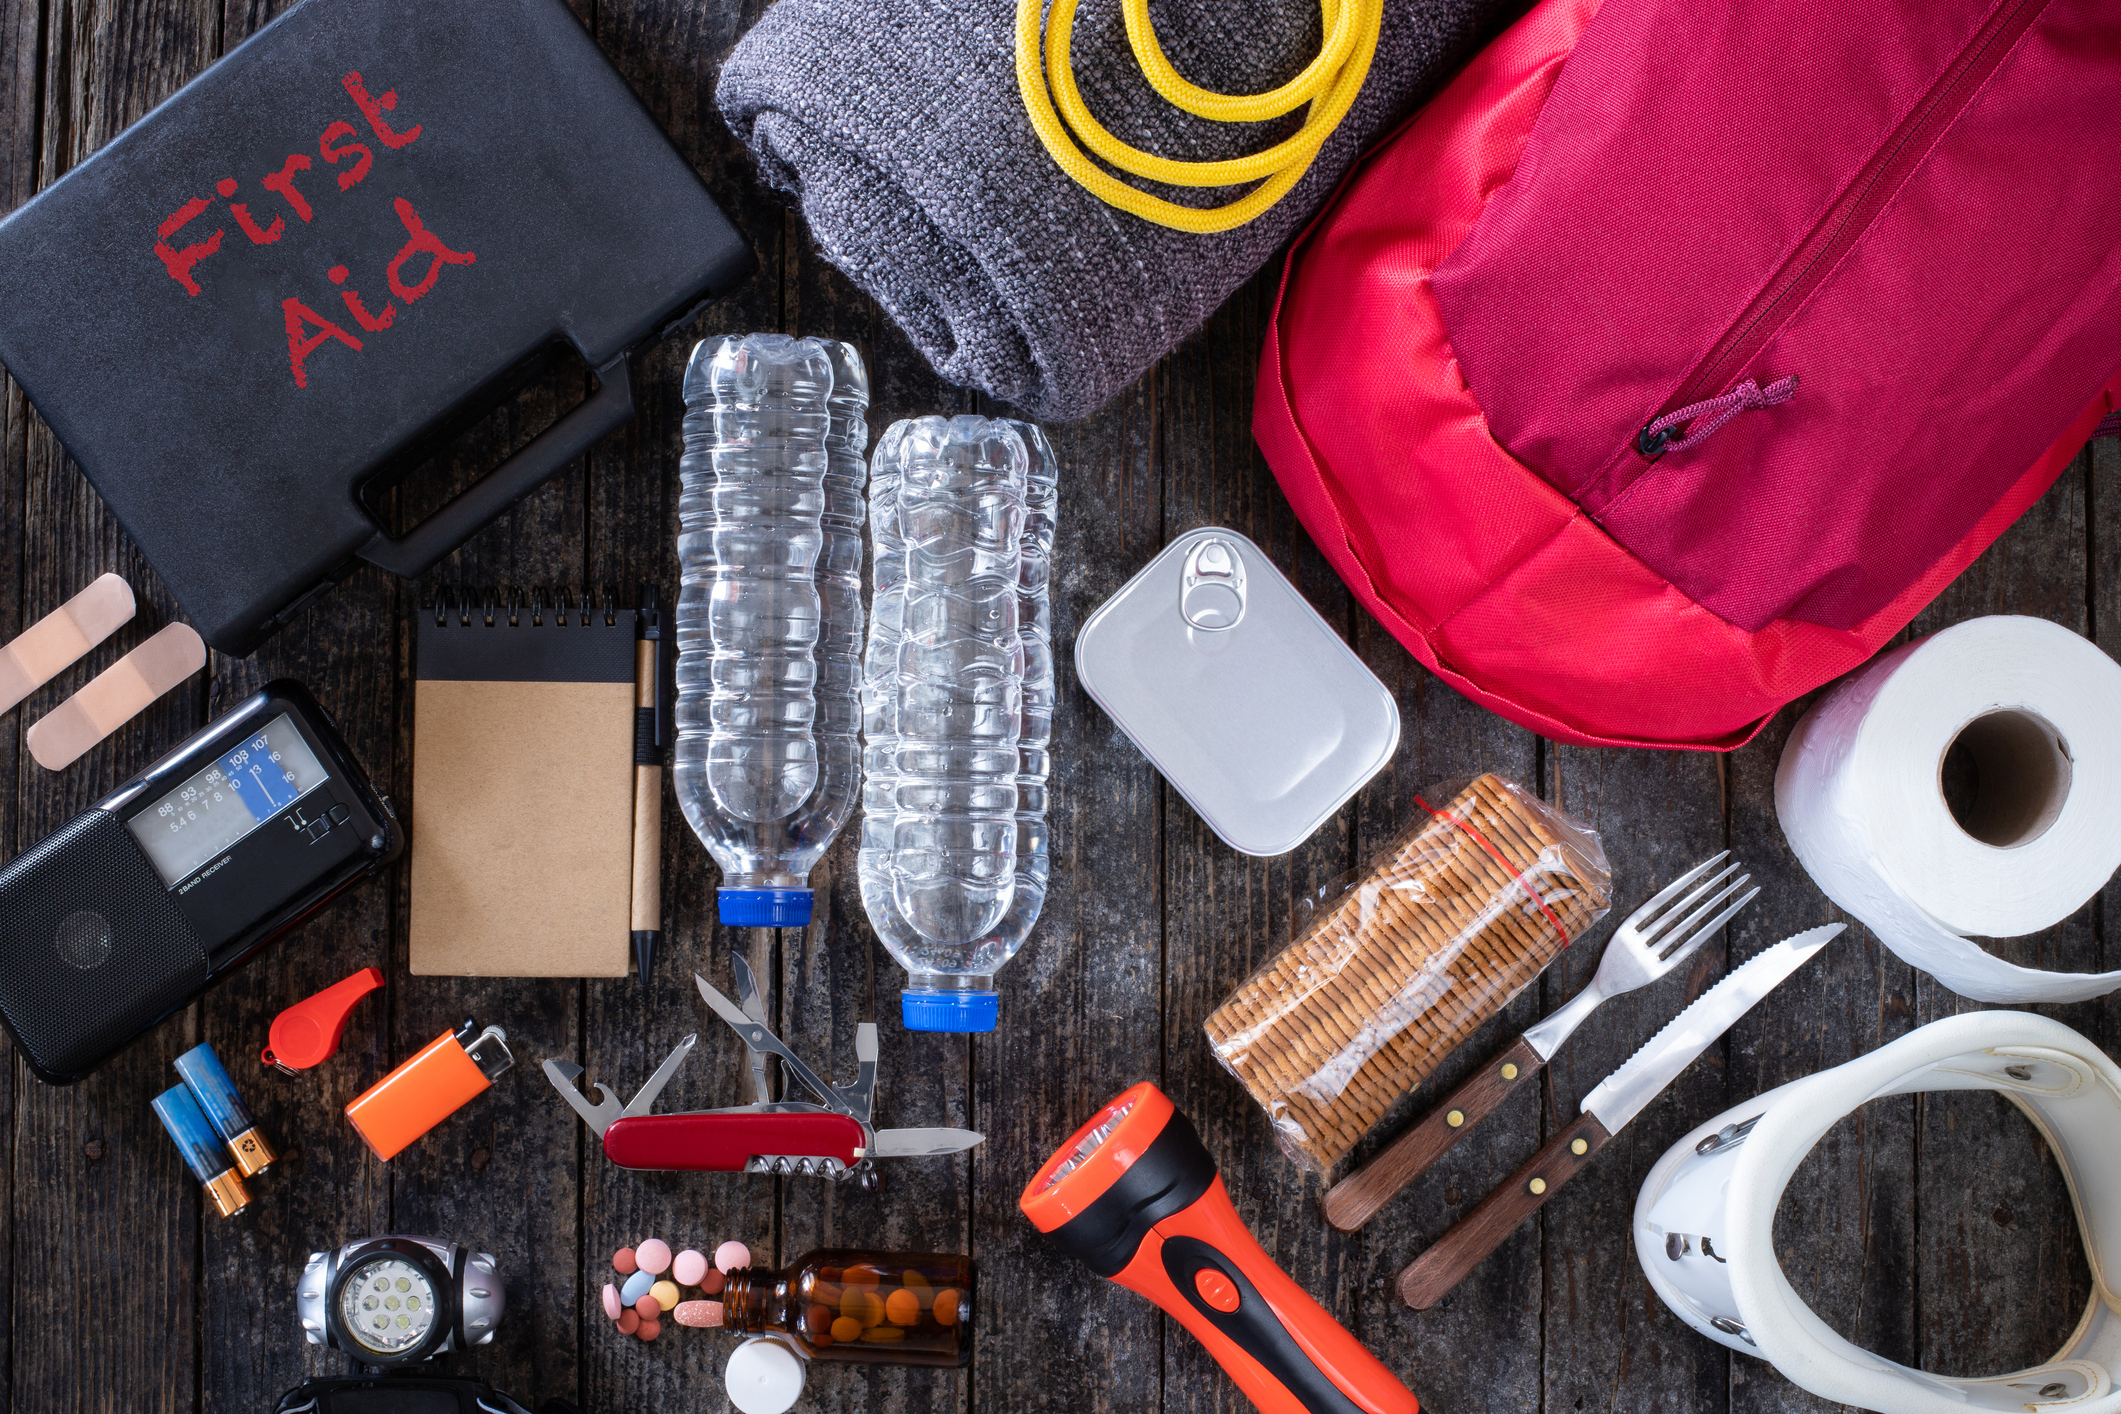 Sorted-Out-Natural-Disaster-Emergency-Kit